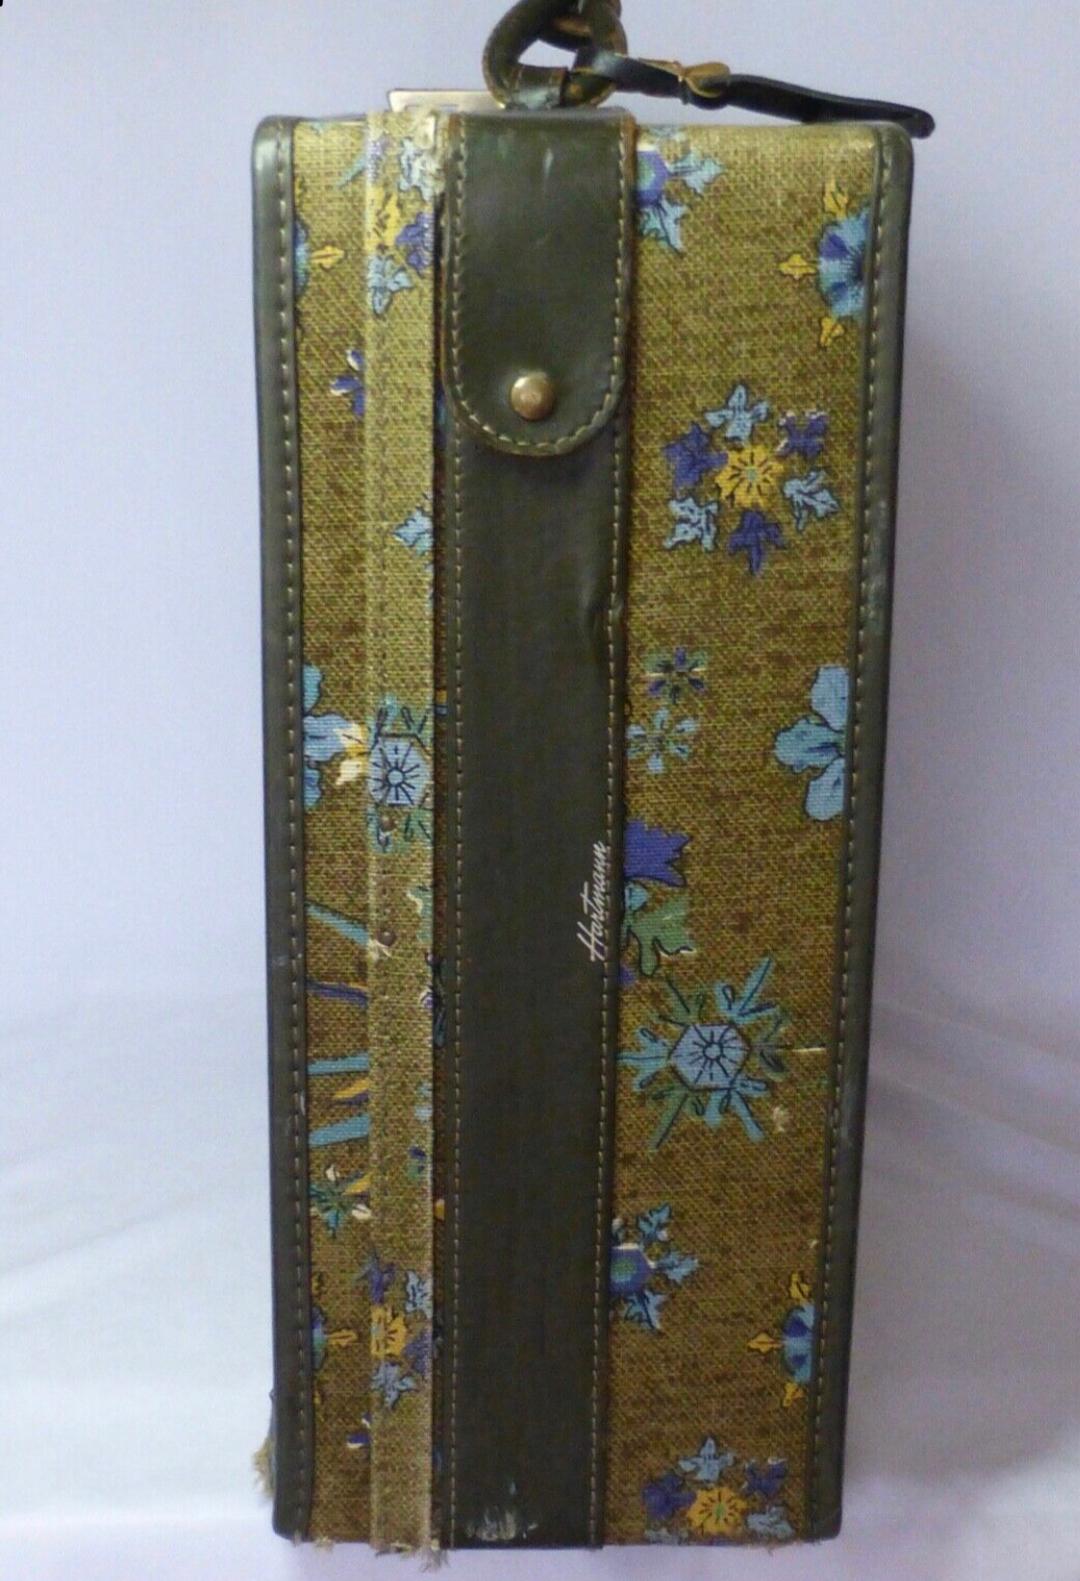 Piero Fornasetti for Hartmann & Saks 5th avenue green tweed sunshine suitcase 1950s with leather accents and original ID tag, labeled. 

This is an extremely rare piece from the 1950’s luxury luggage and handbag boutique or department at Saks 5th